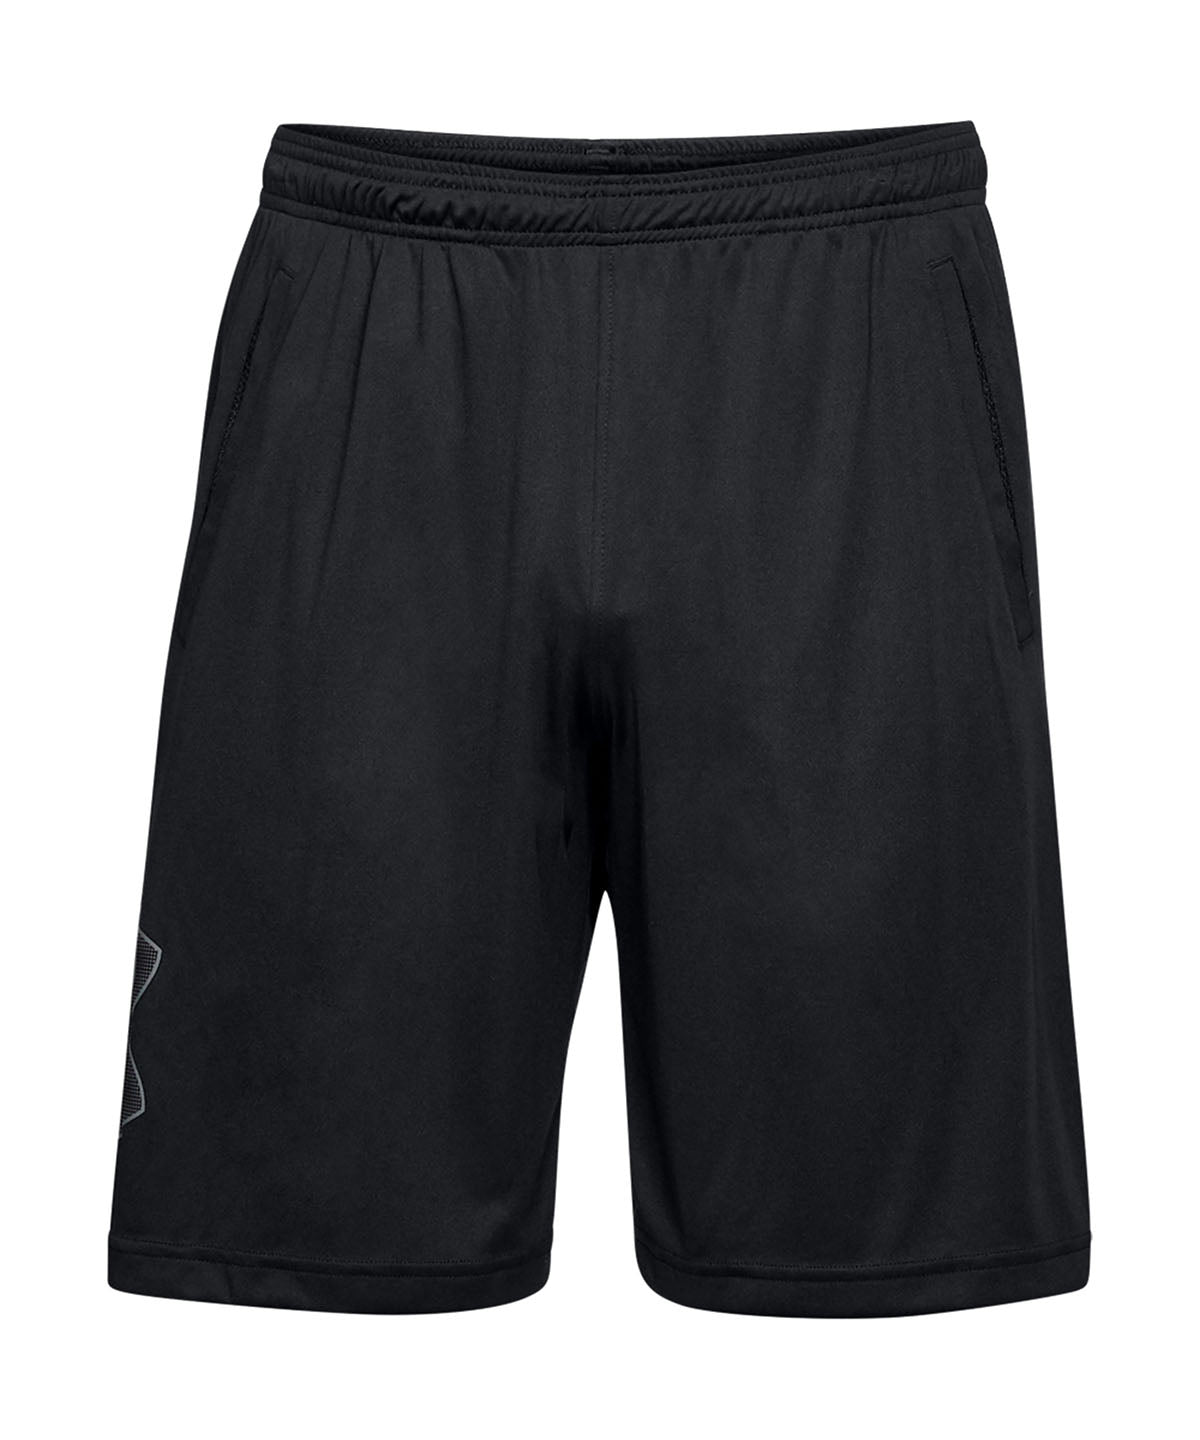 Under Armour Techgraphic Shorts